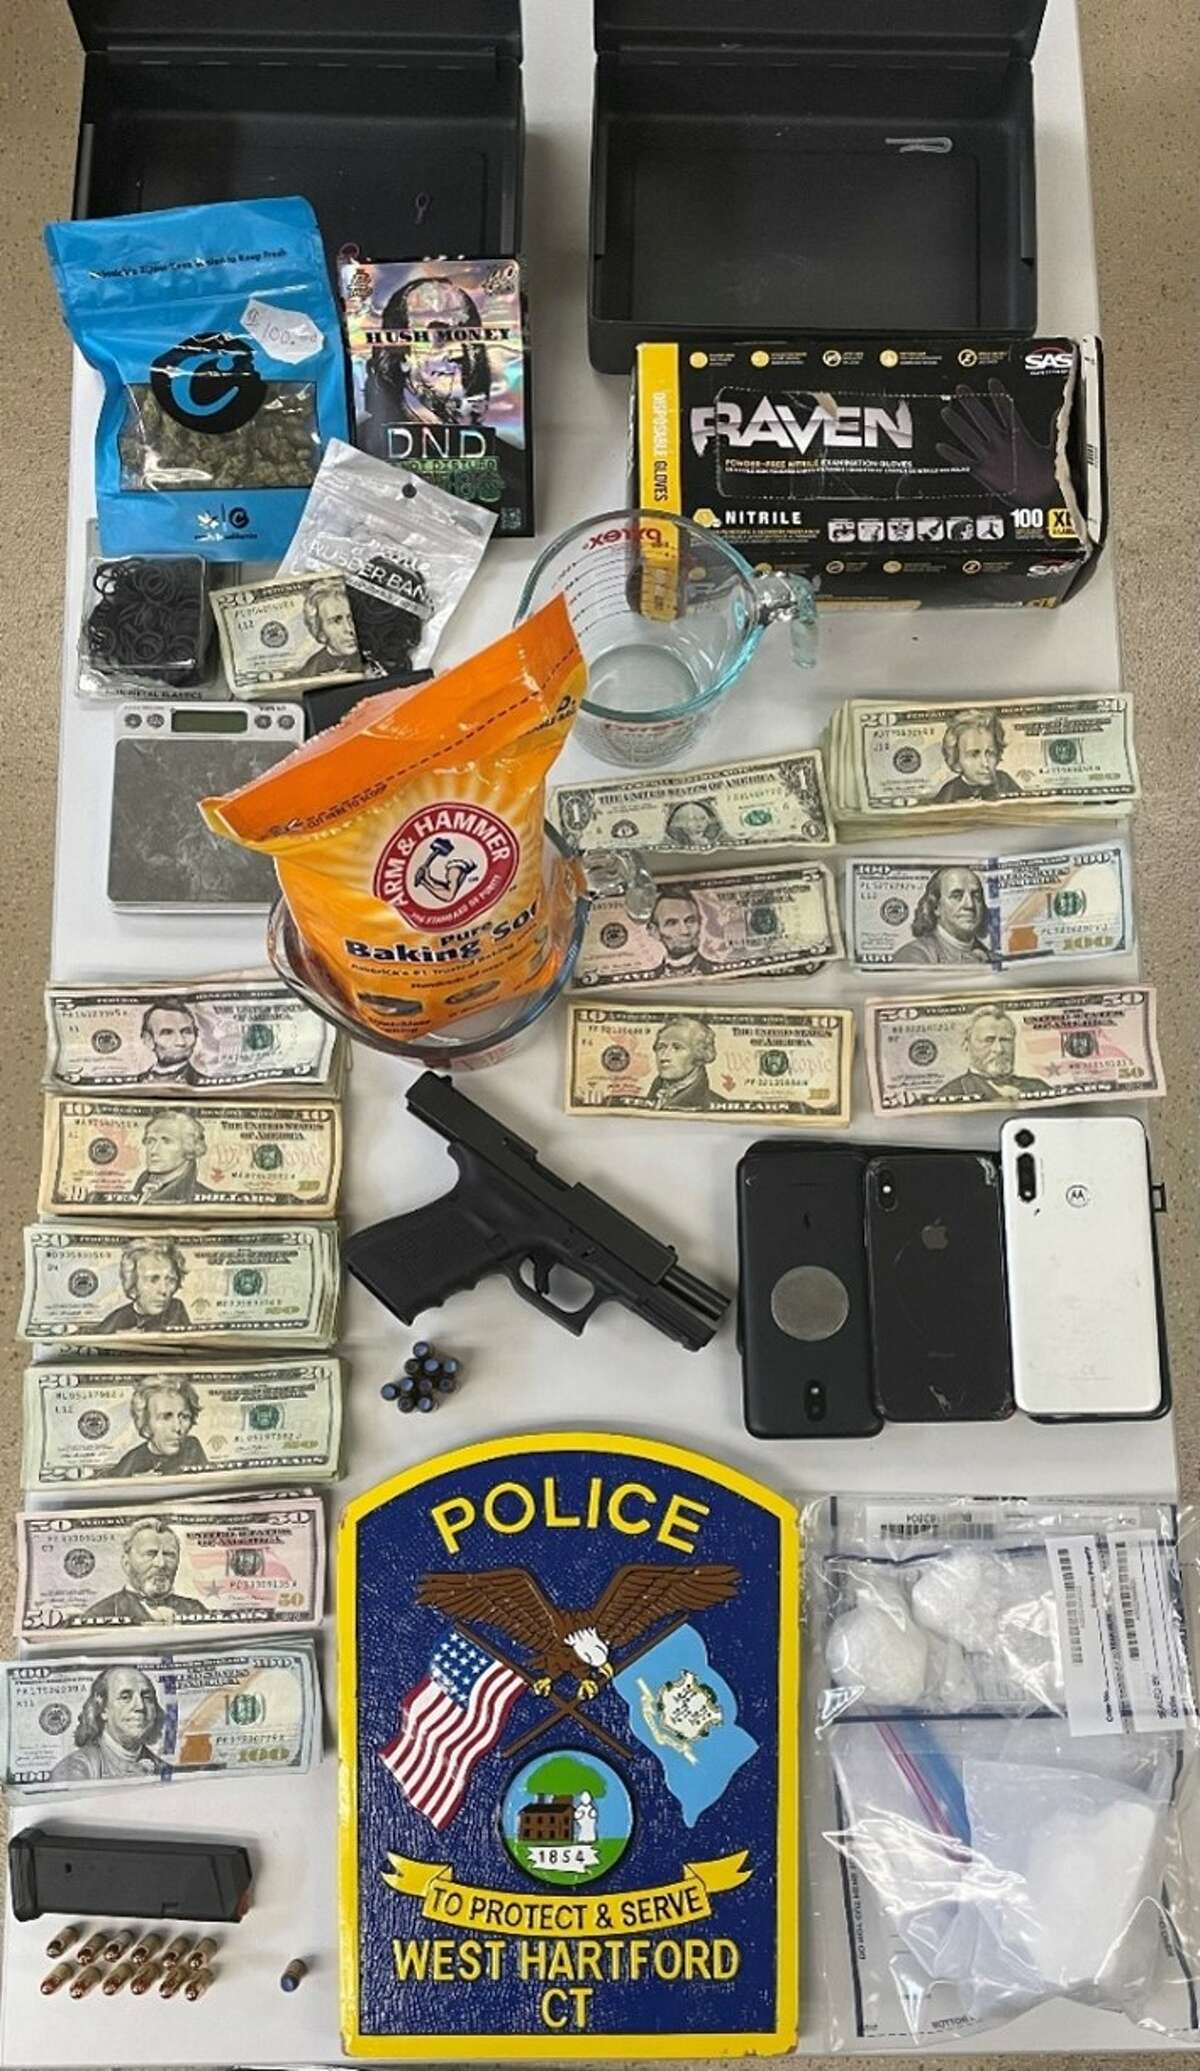 Tylon Butler, 36, of Hartford, was arrested around noon Wednesday after patrol officers discovered drugs, ammunition, a loaded handgun and other illegal and/or suspicious items inside a stolen car he was driving, according to West Hartford police.